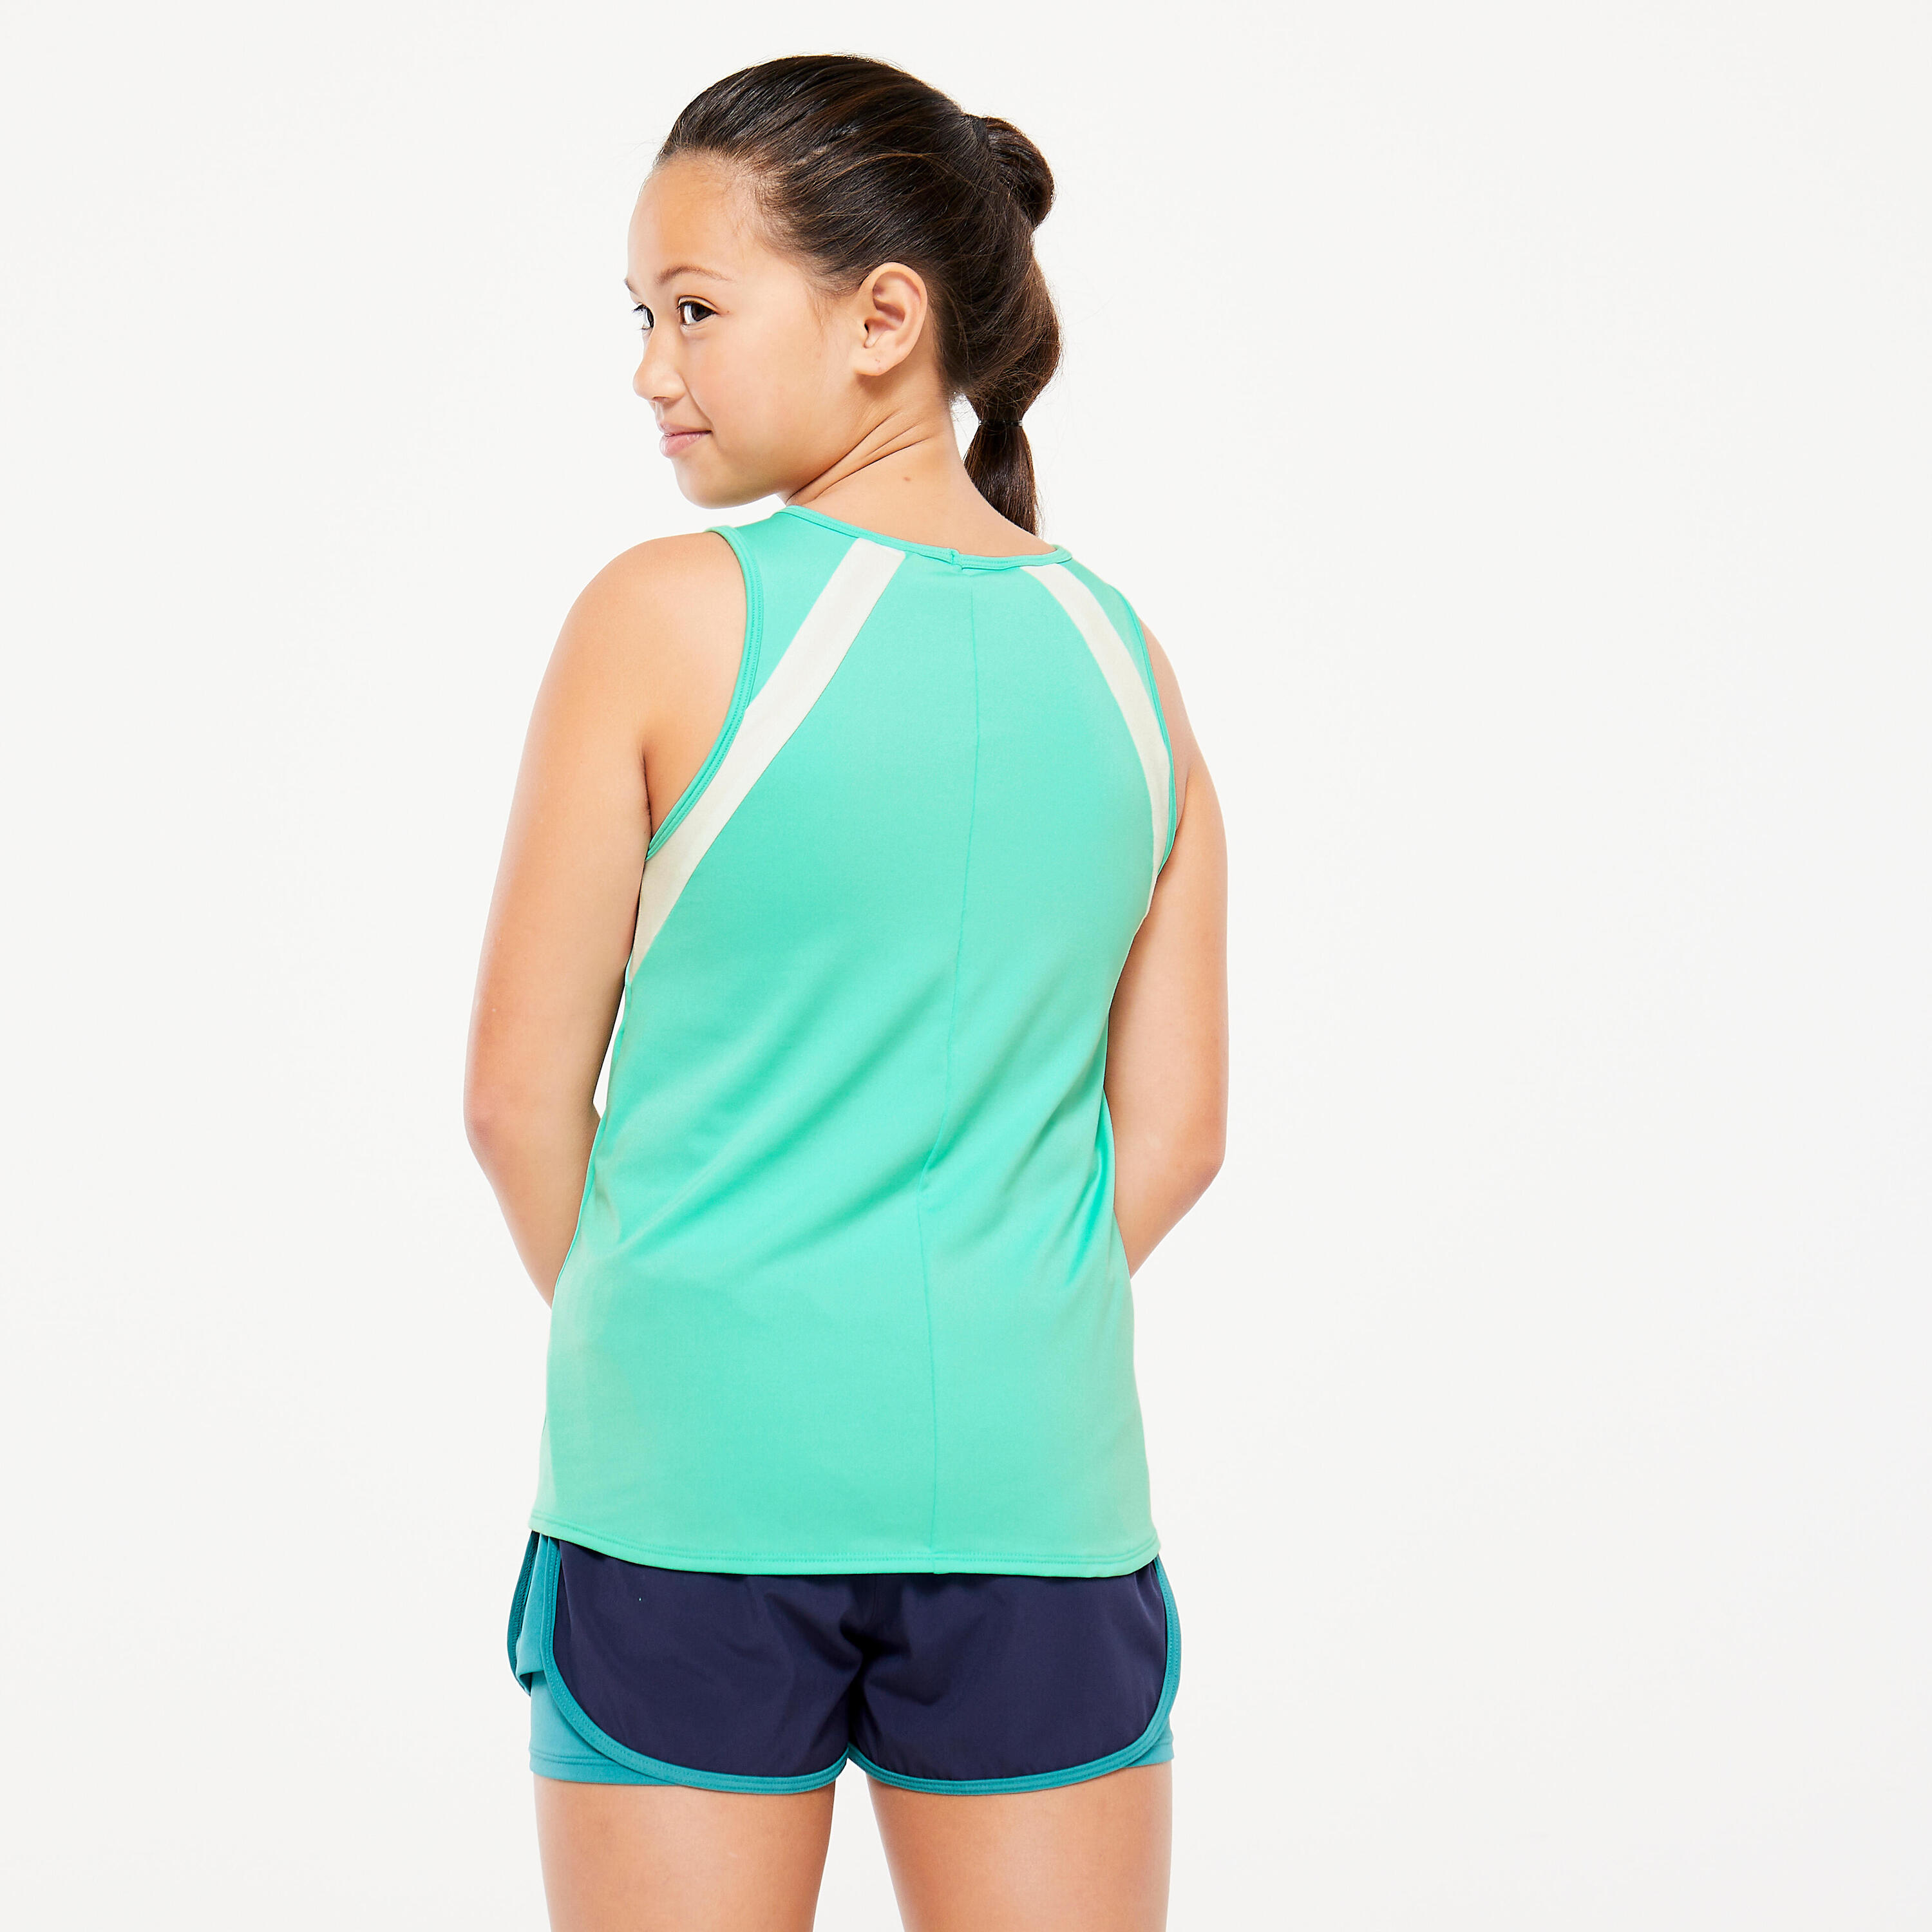 Girls' Breathable Tank Top - Green 4/4